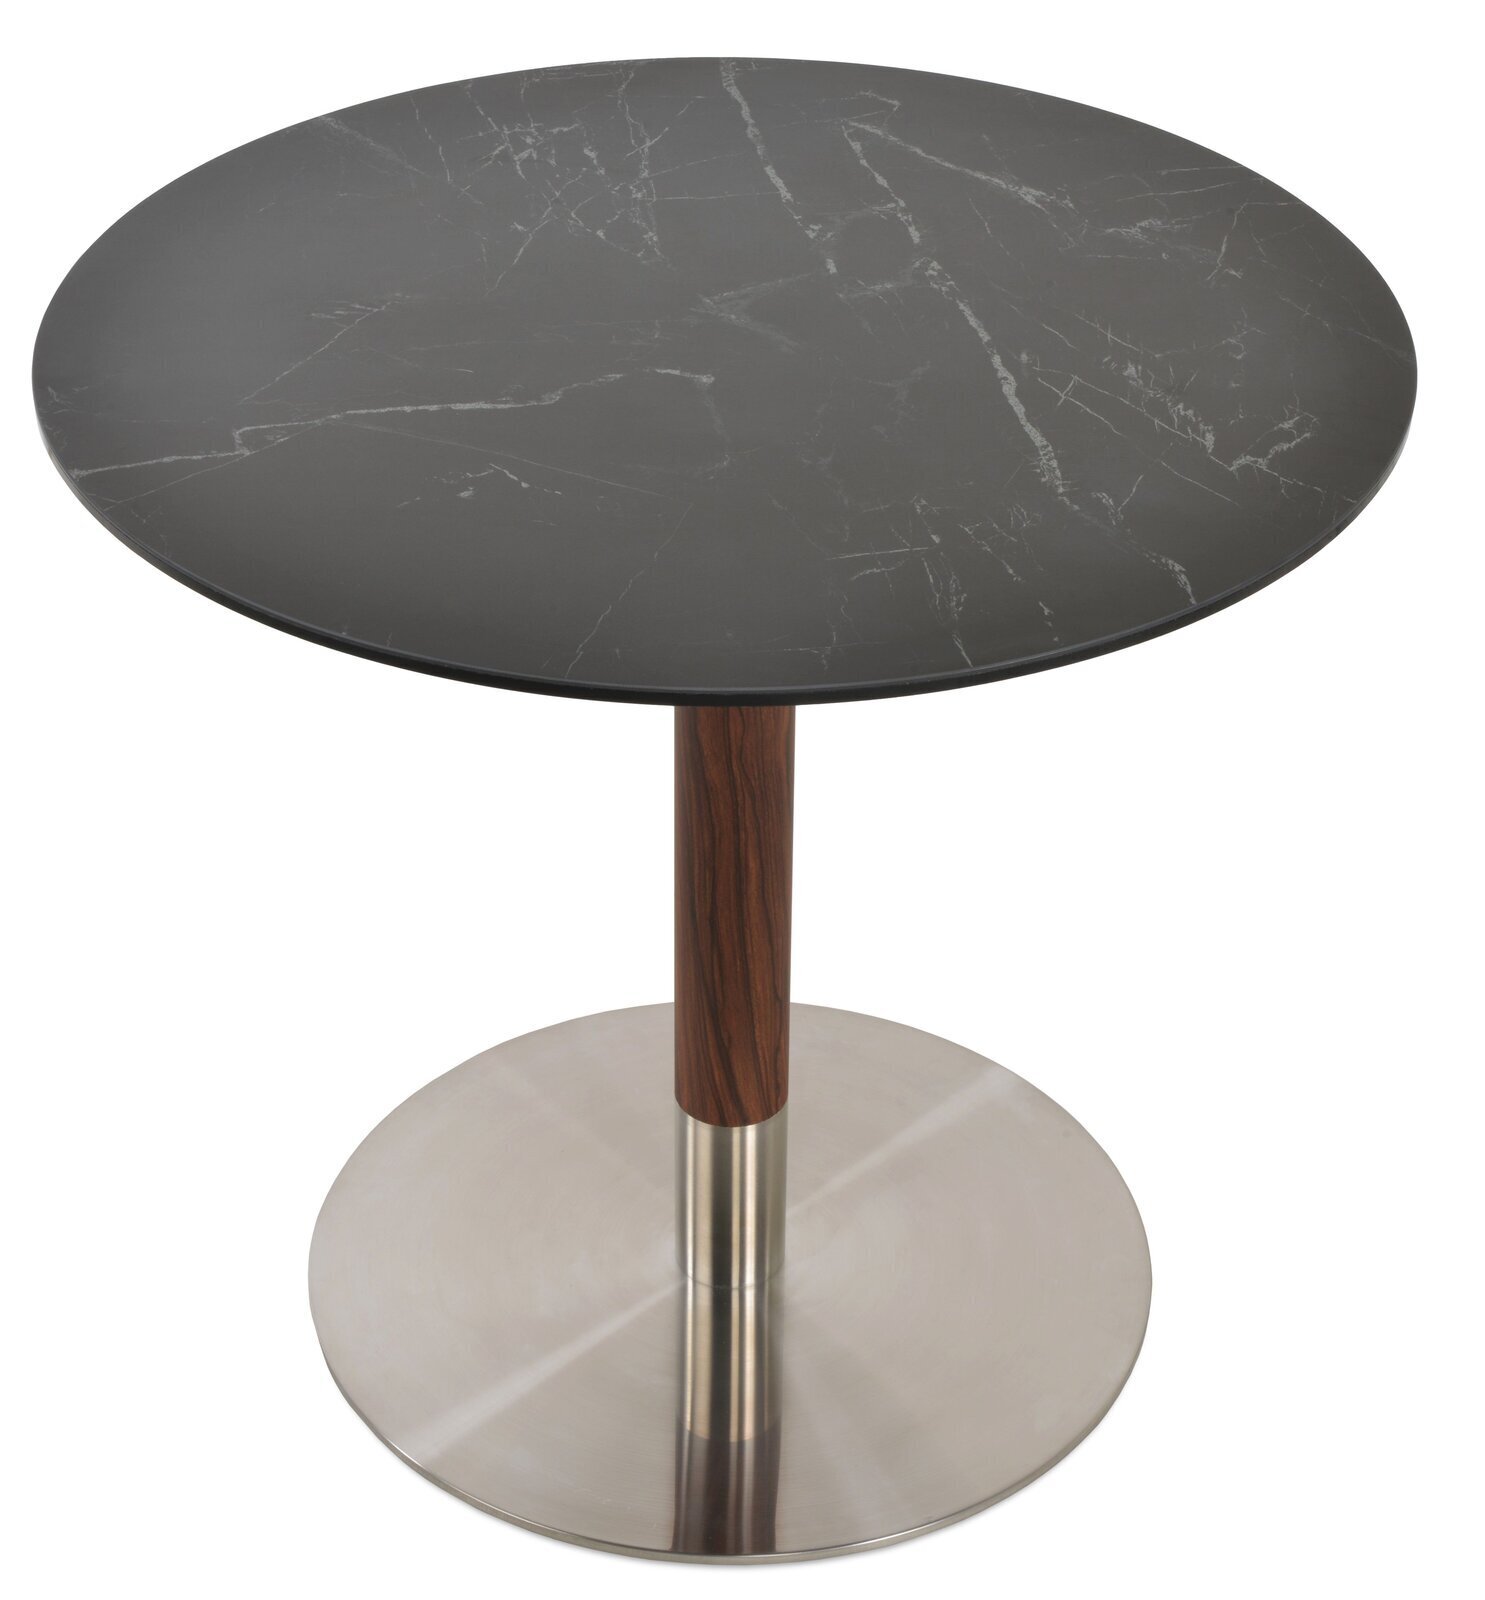 Marble Pedestal Table With Wood And Metal Accents